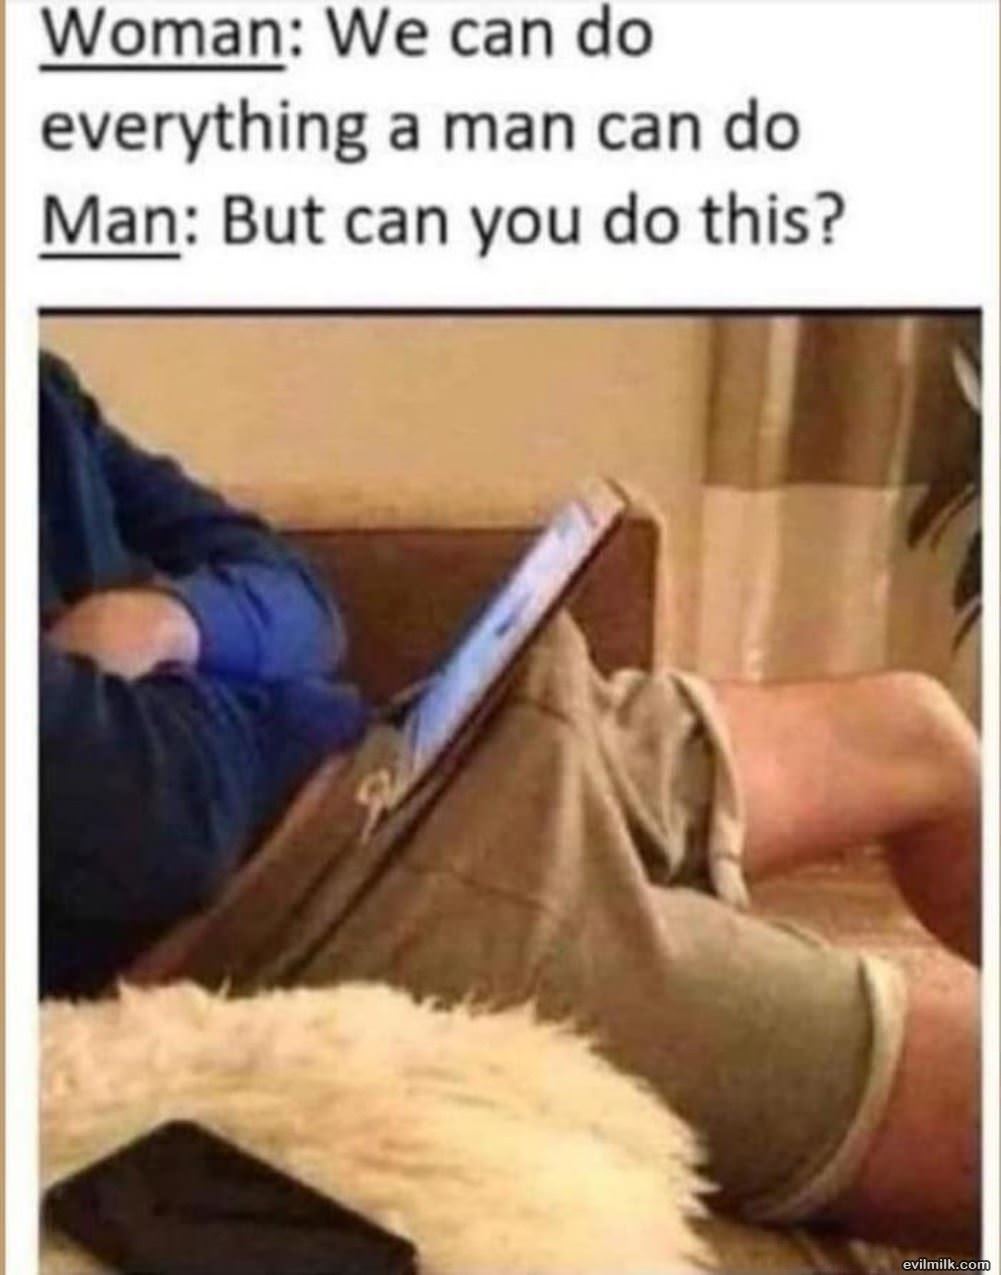 But Can You Do This